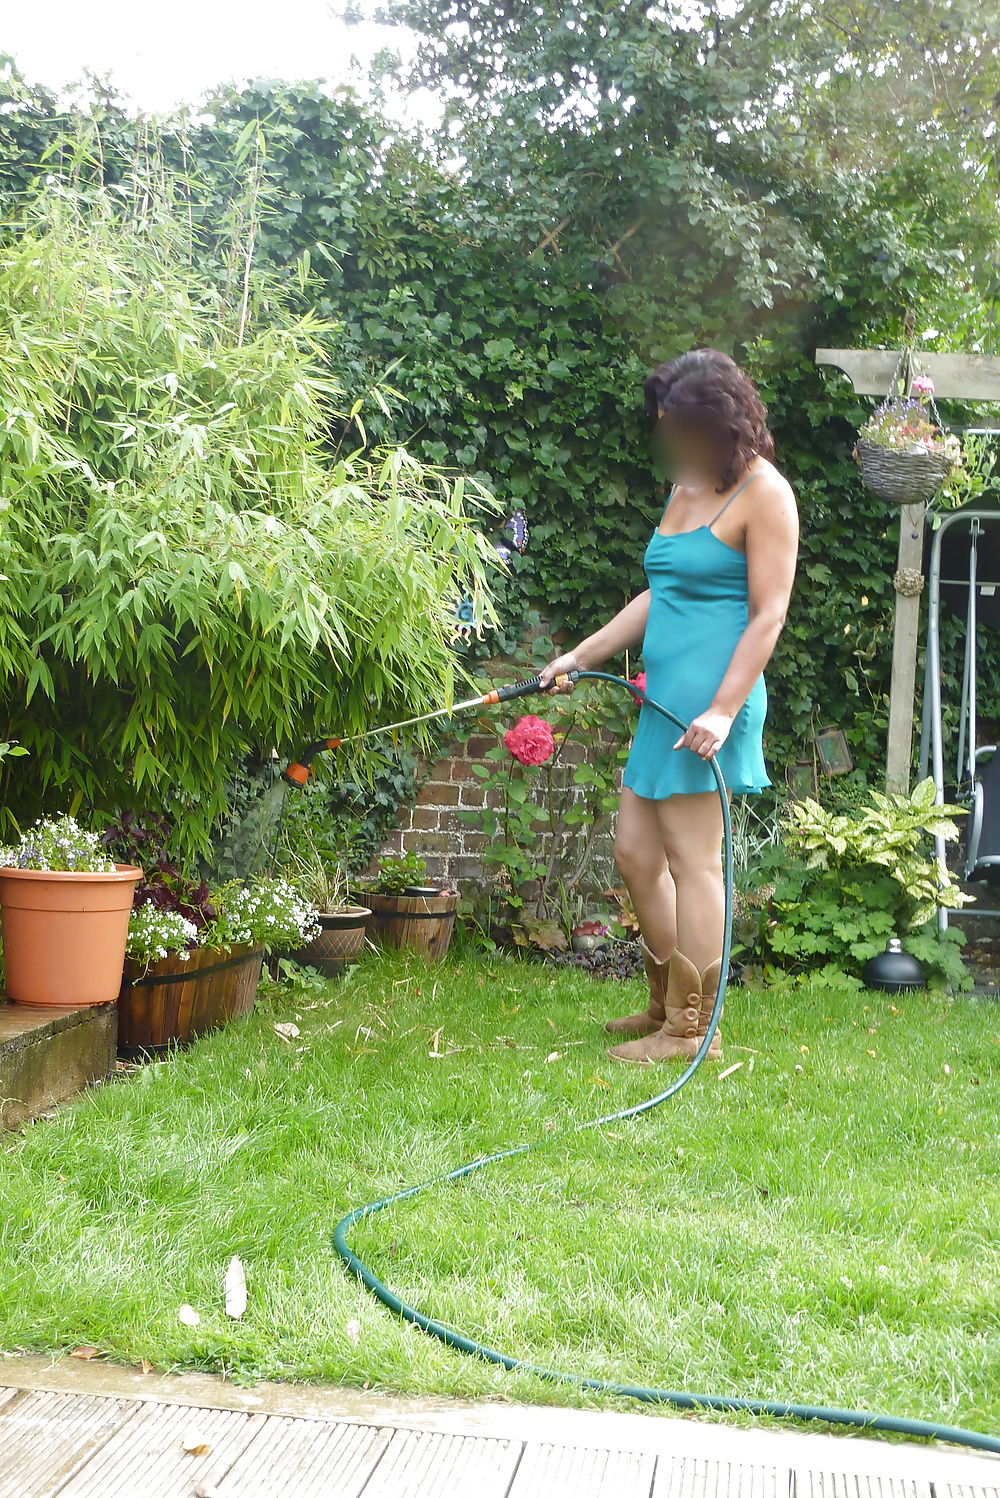 In the garden pict gal